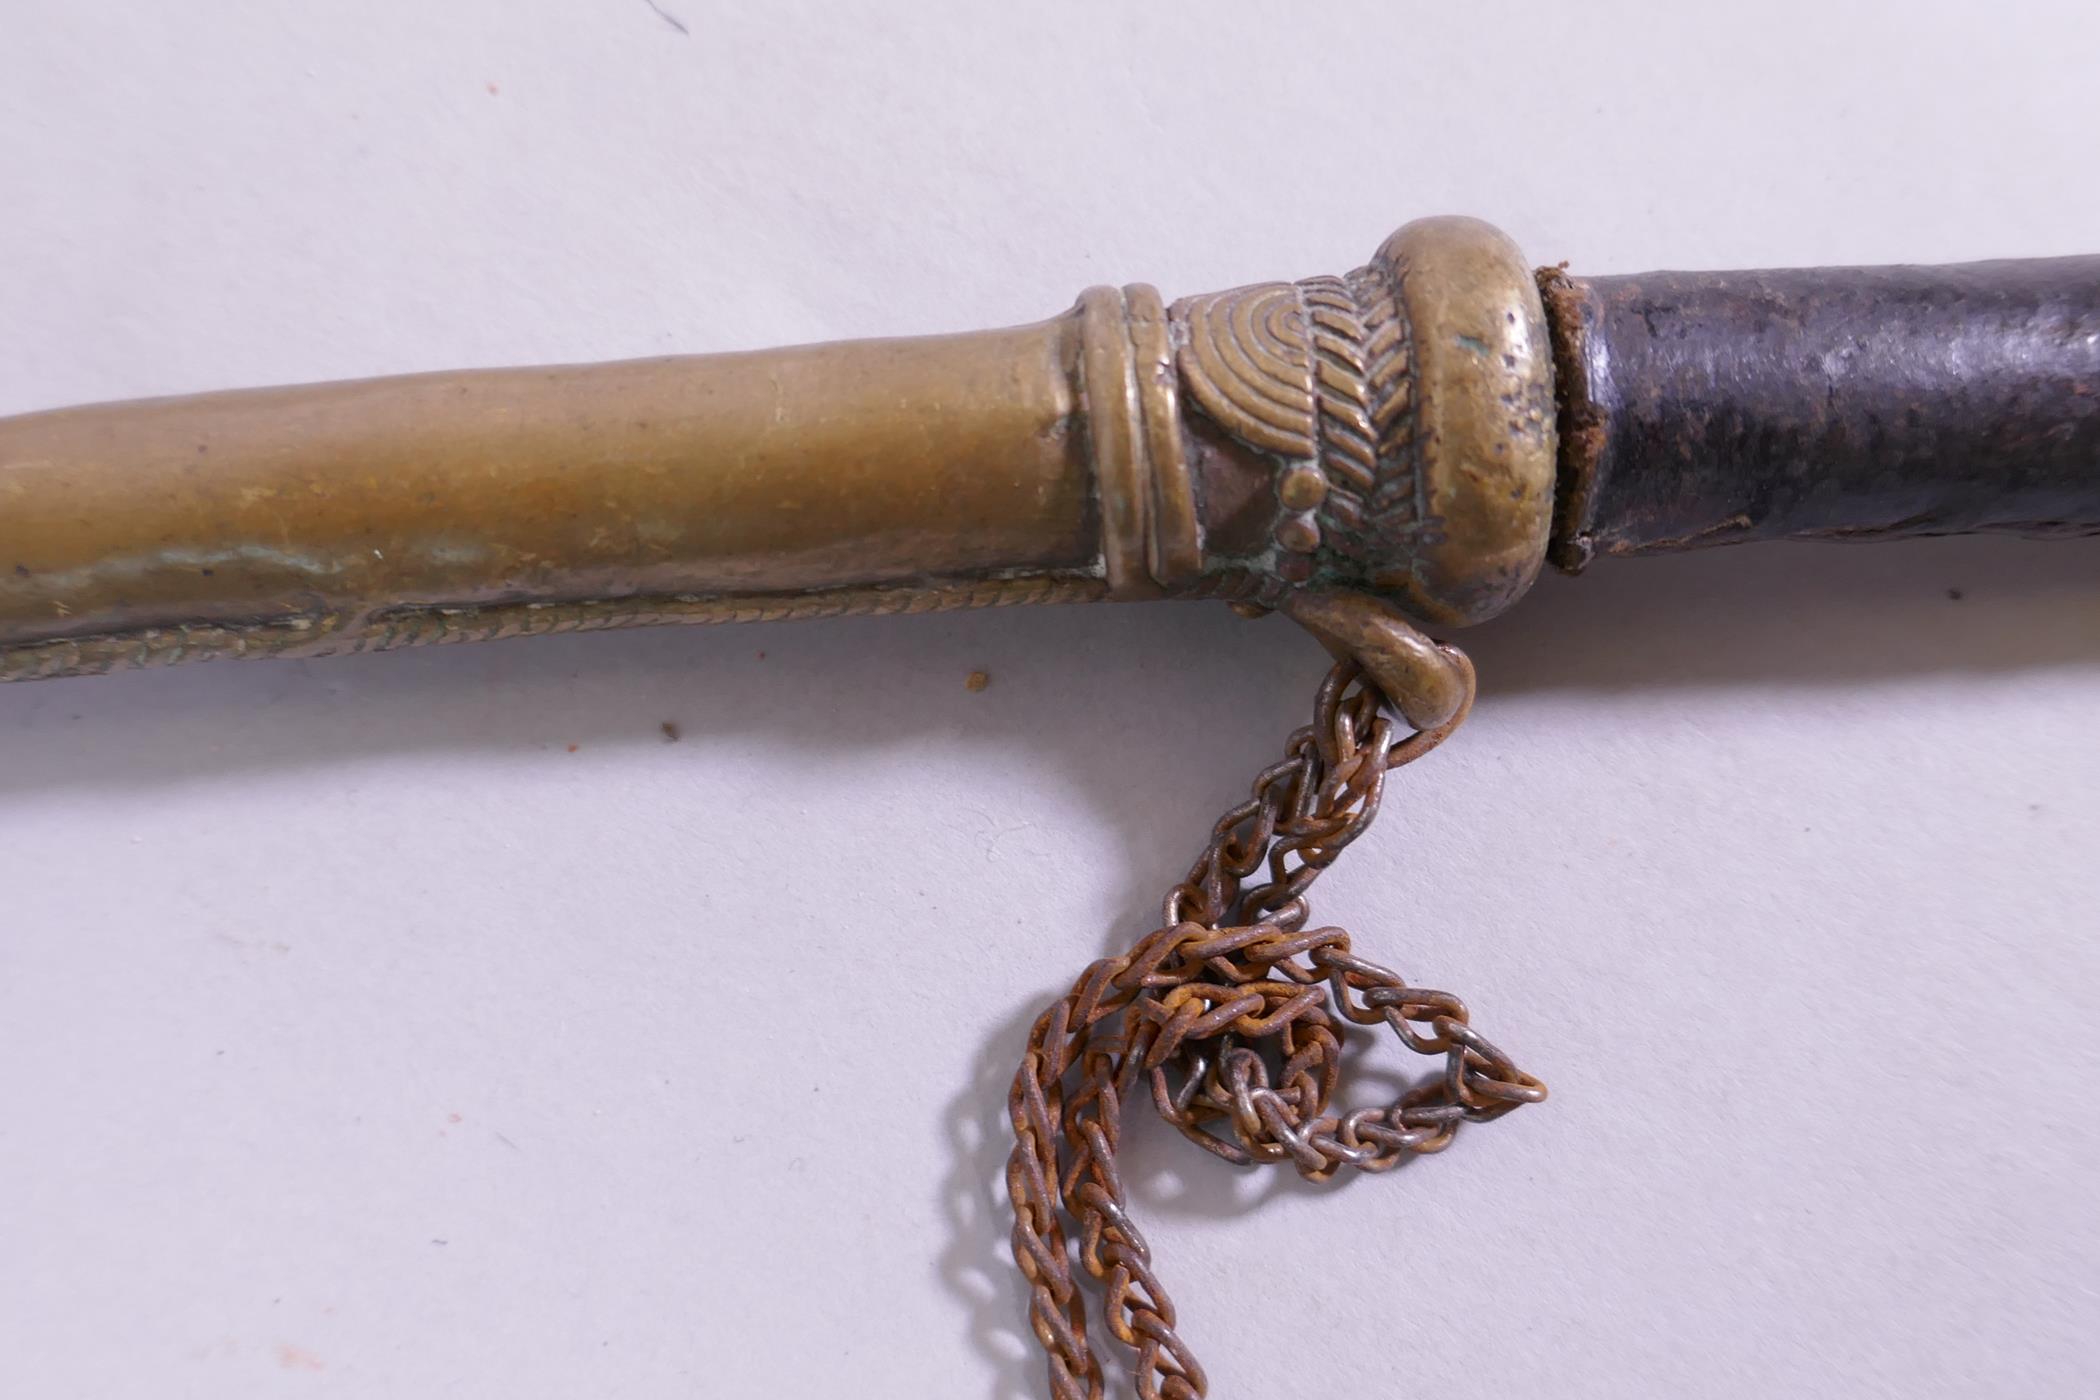 An antique Eastern bras opium pipe with stitched leather shaft, 33cm long - Image 3 of 4